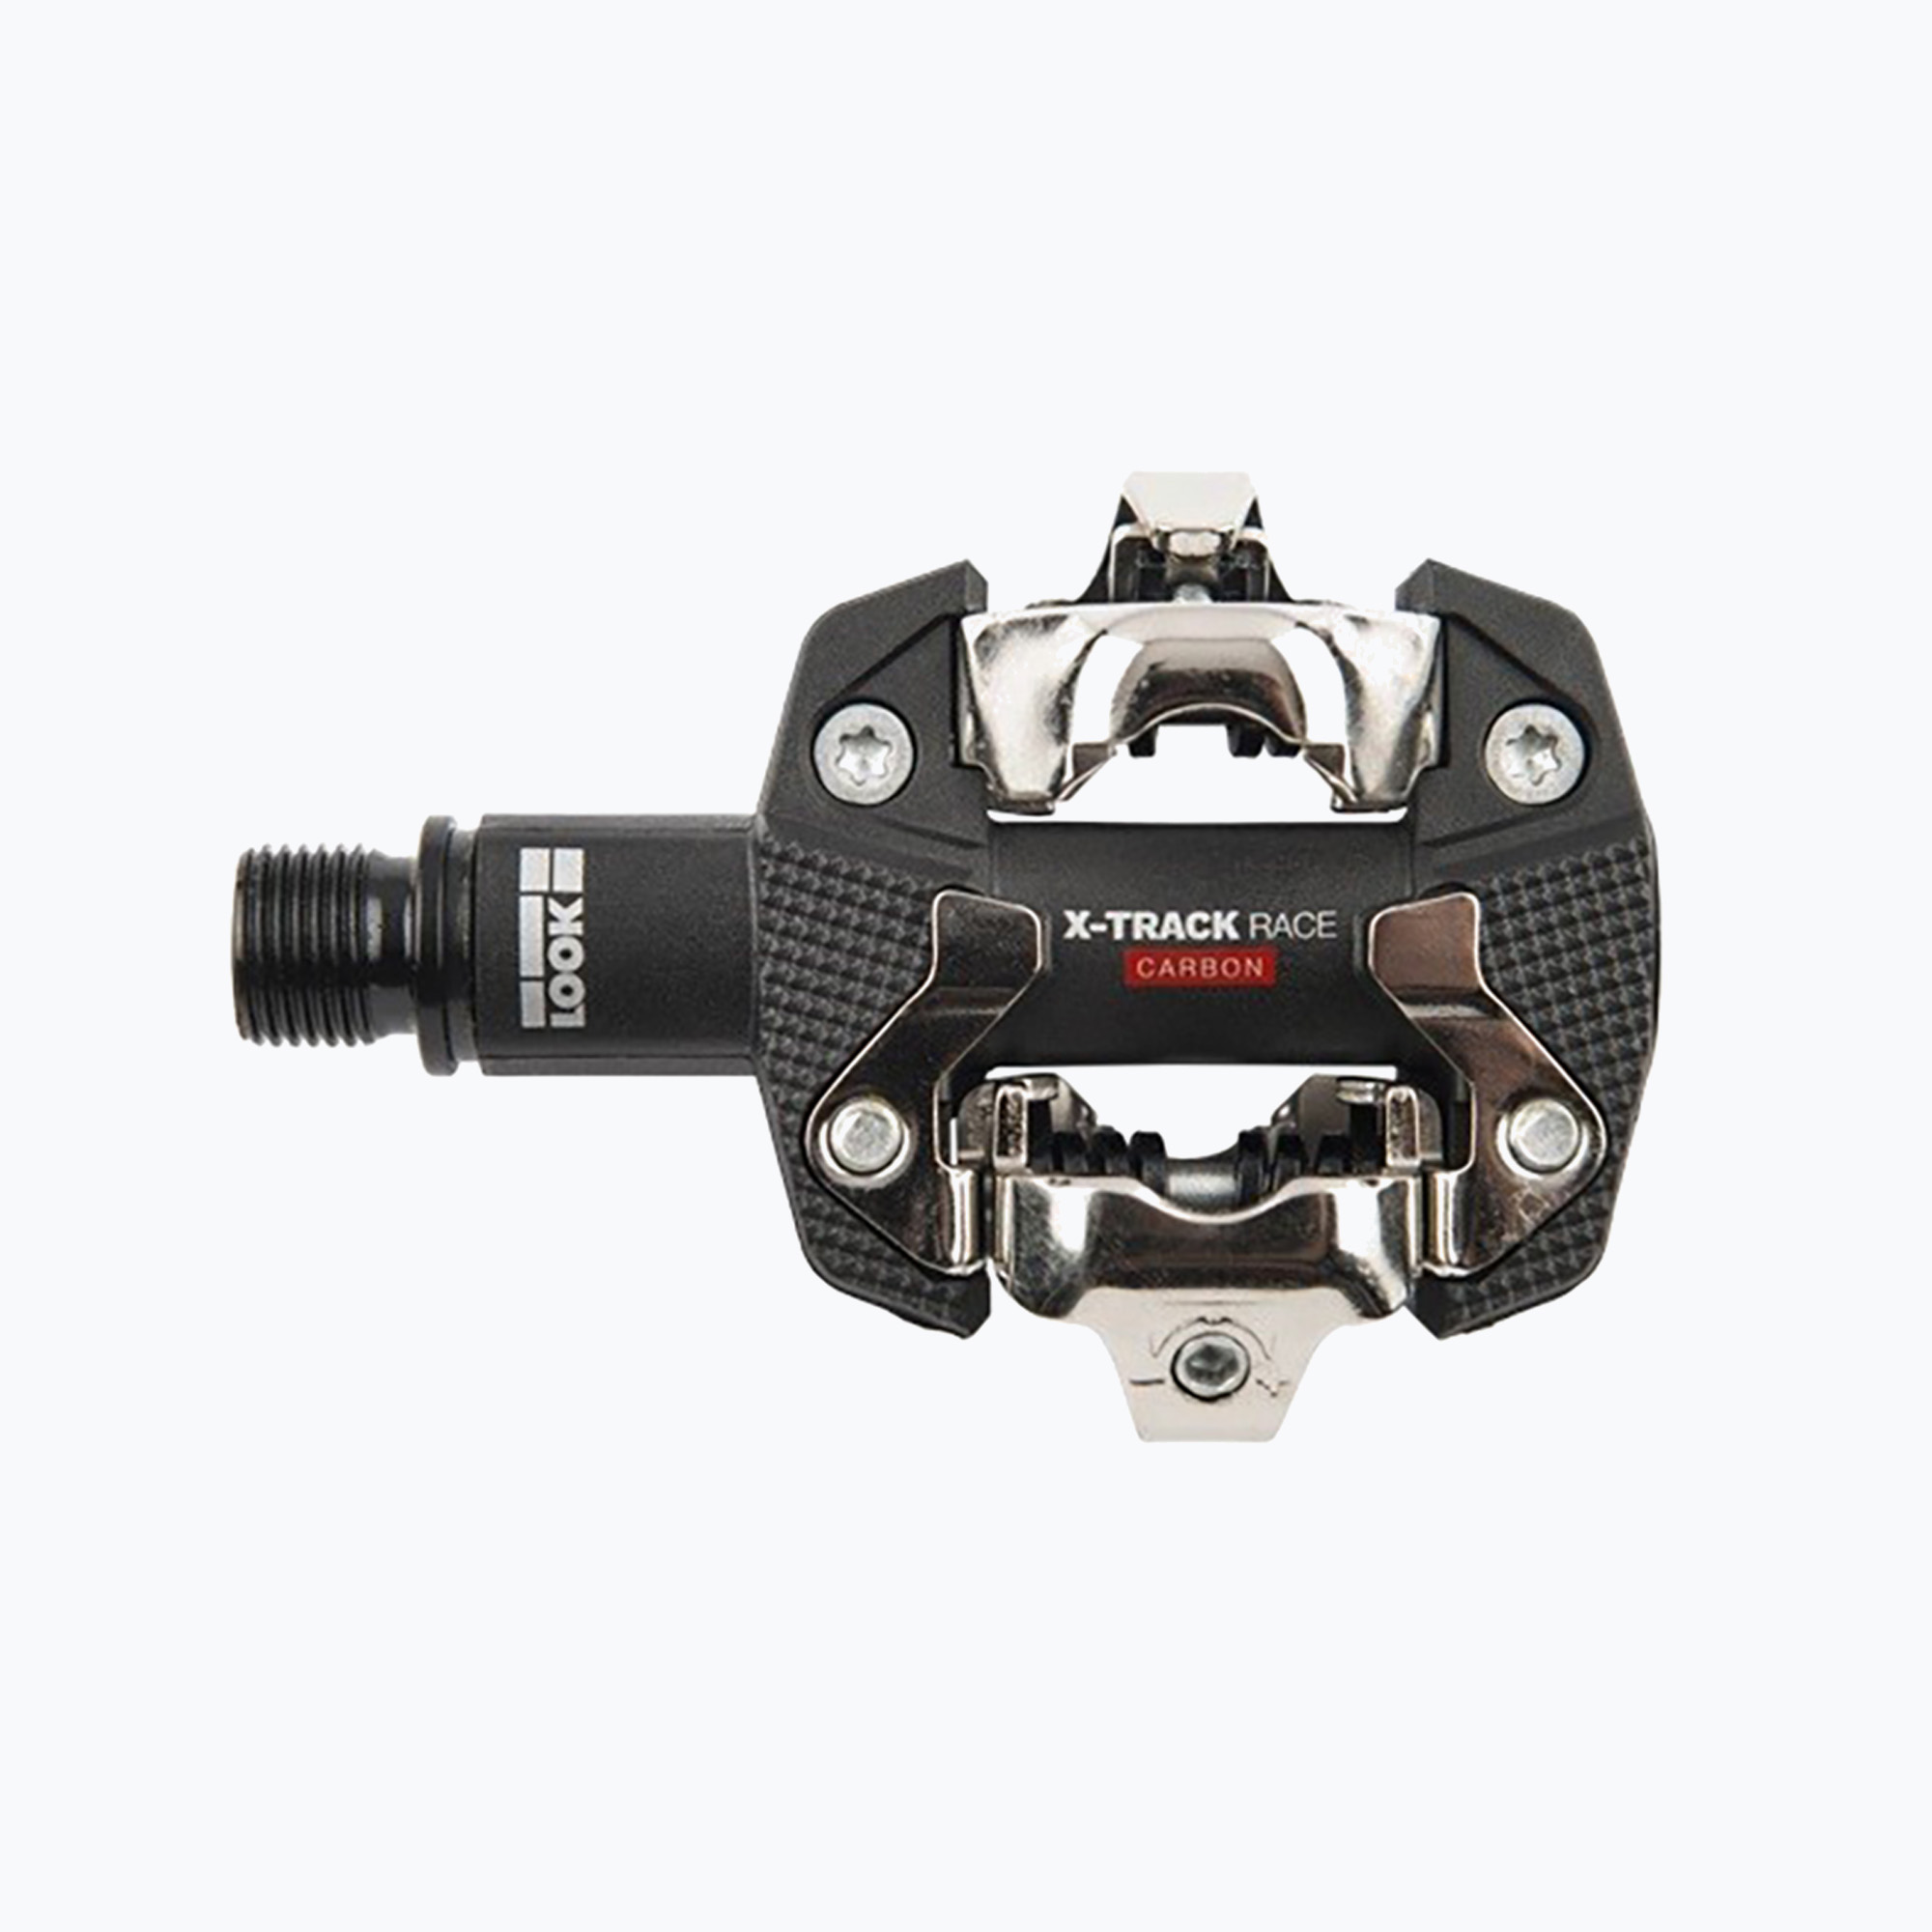 LOOK X-Track Race Carbon Bike Pedals 18223